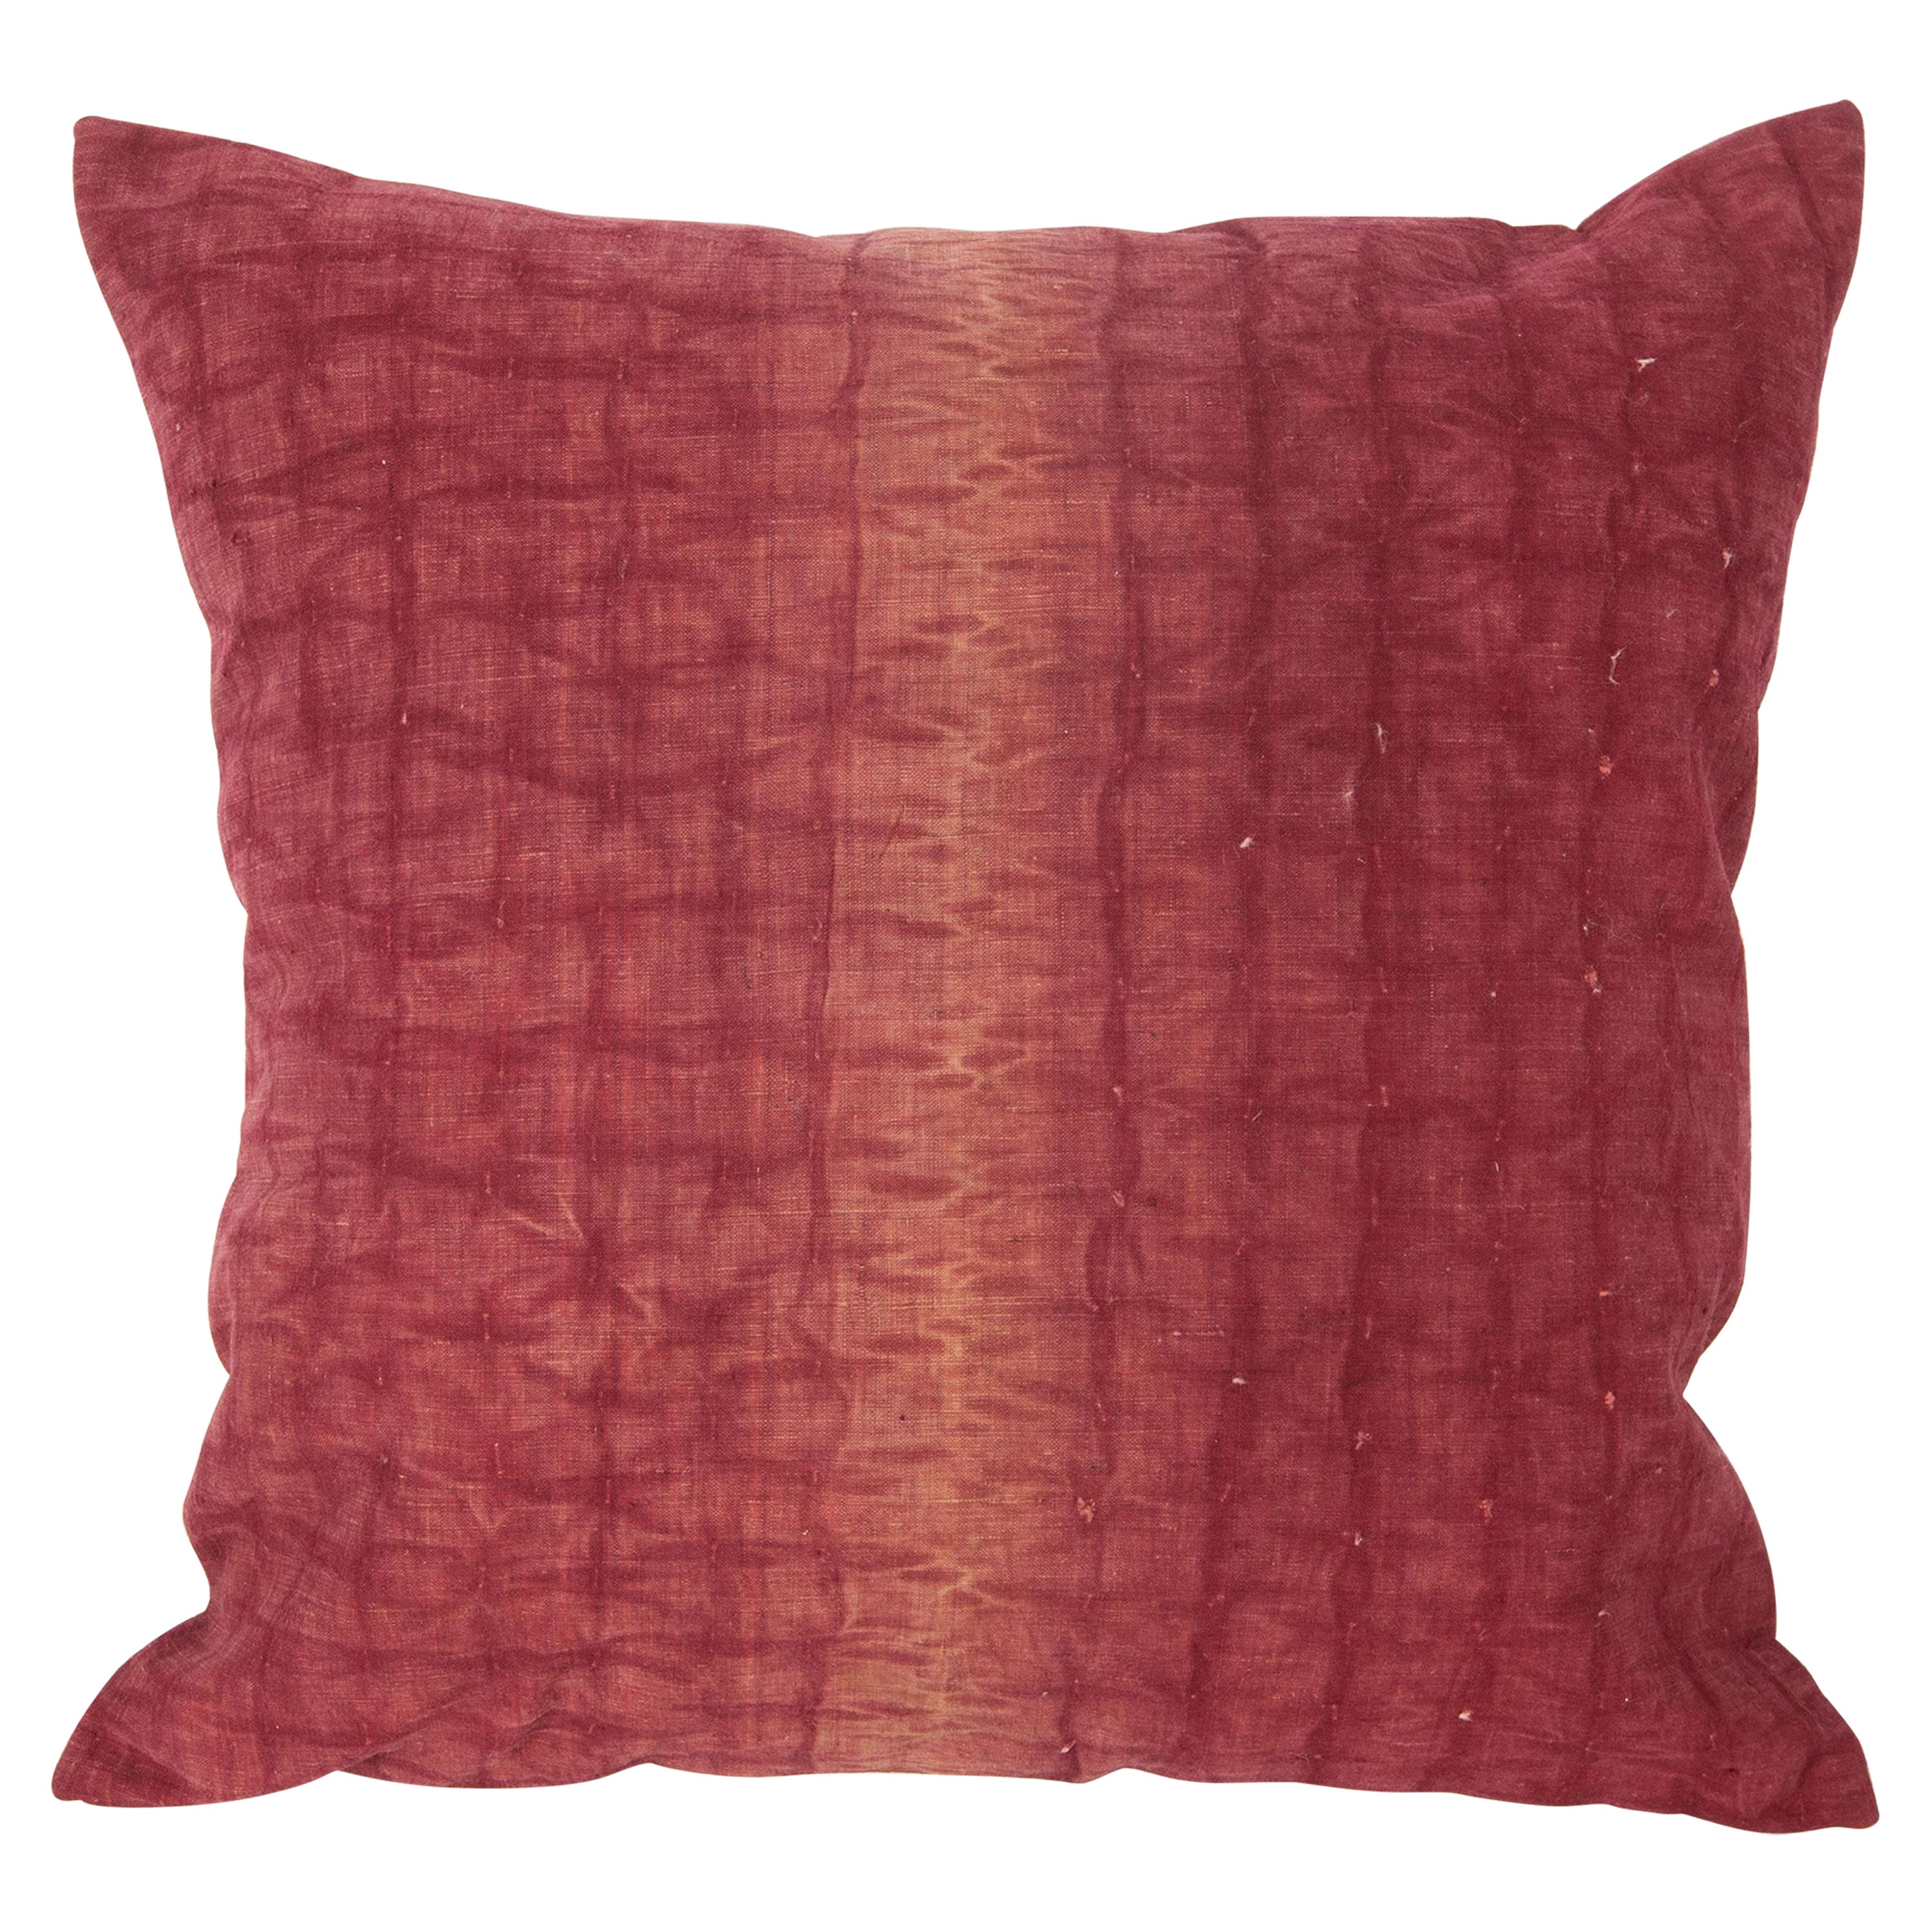 Madder Red Pillow Cover Made from an Early 20th C. Quilt Top, Turkey For Sale